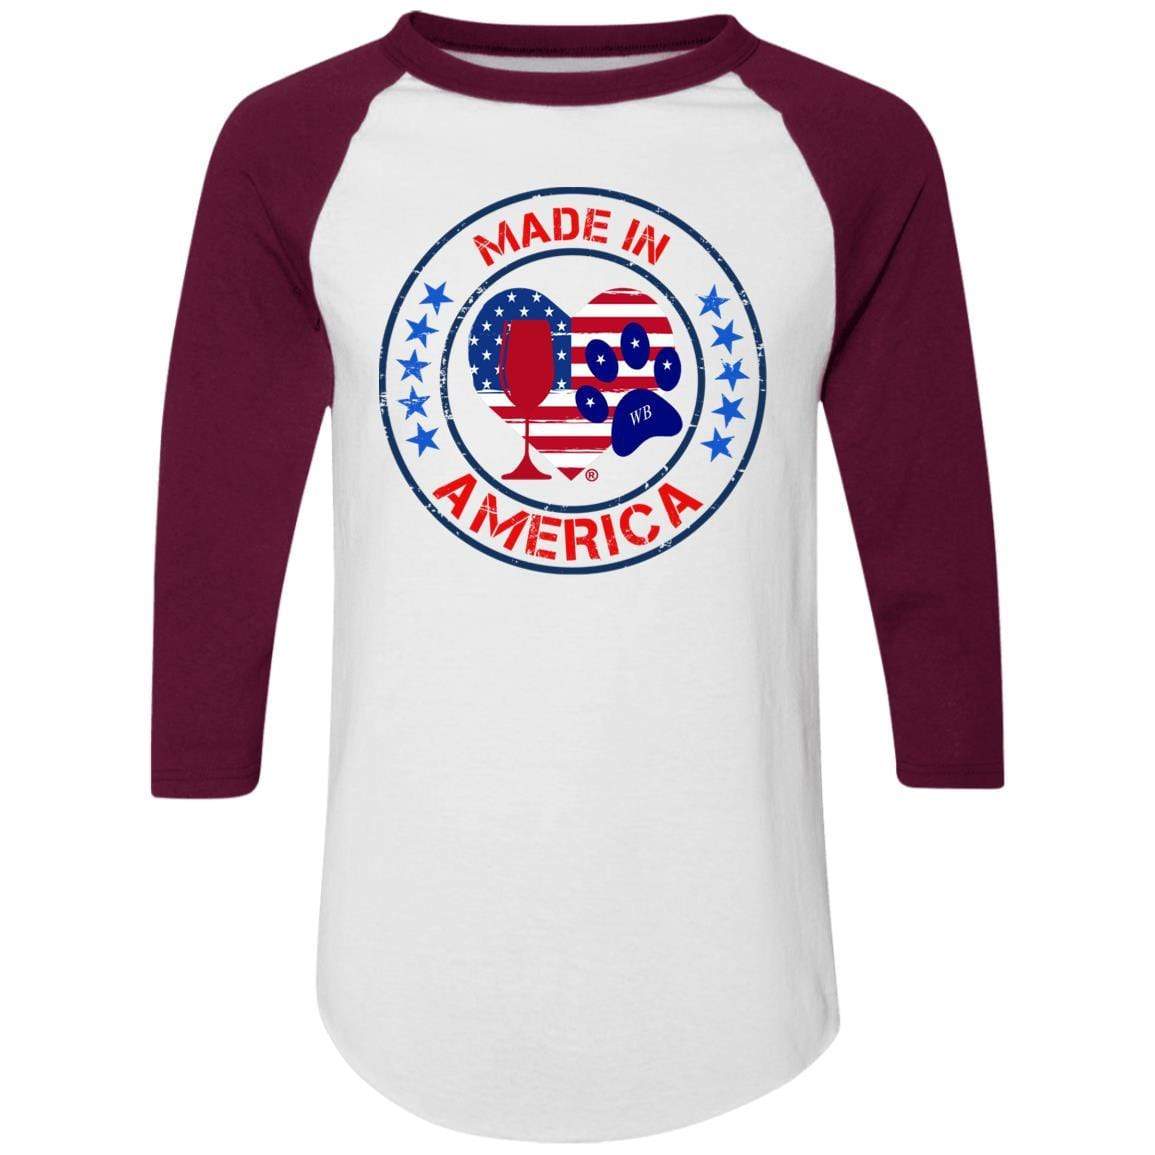 T-Shirts White/Maroon / S Winey Bitches Co "Made In America" Colorblock Raglan Jersey WineyBitchesCo